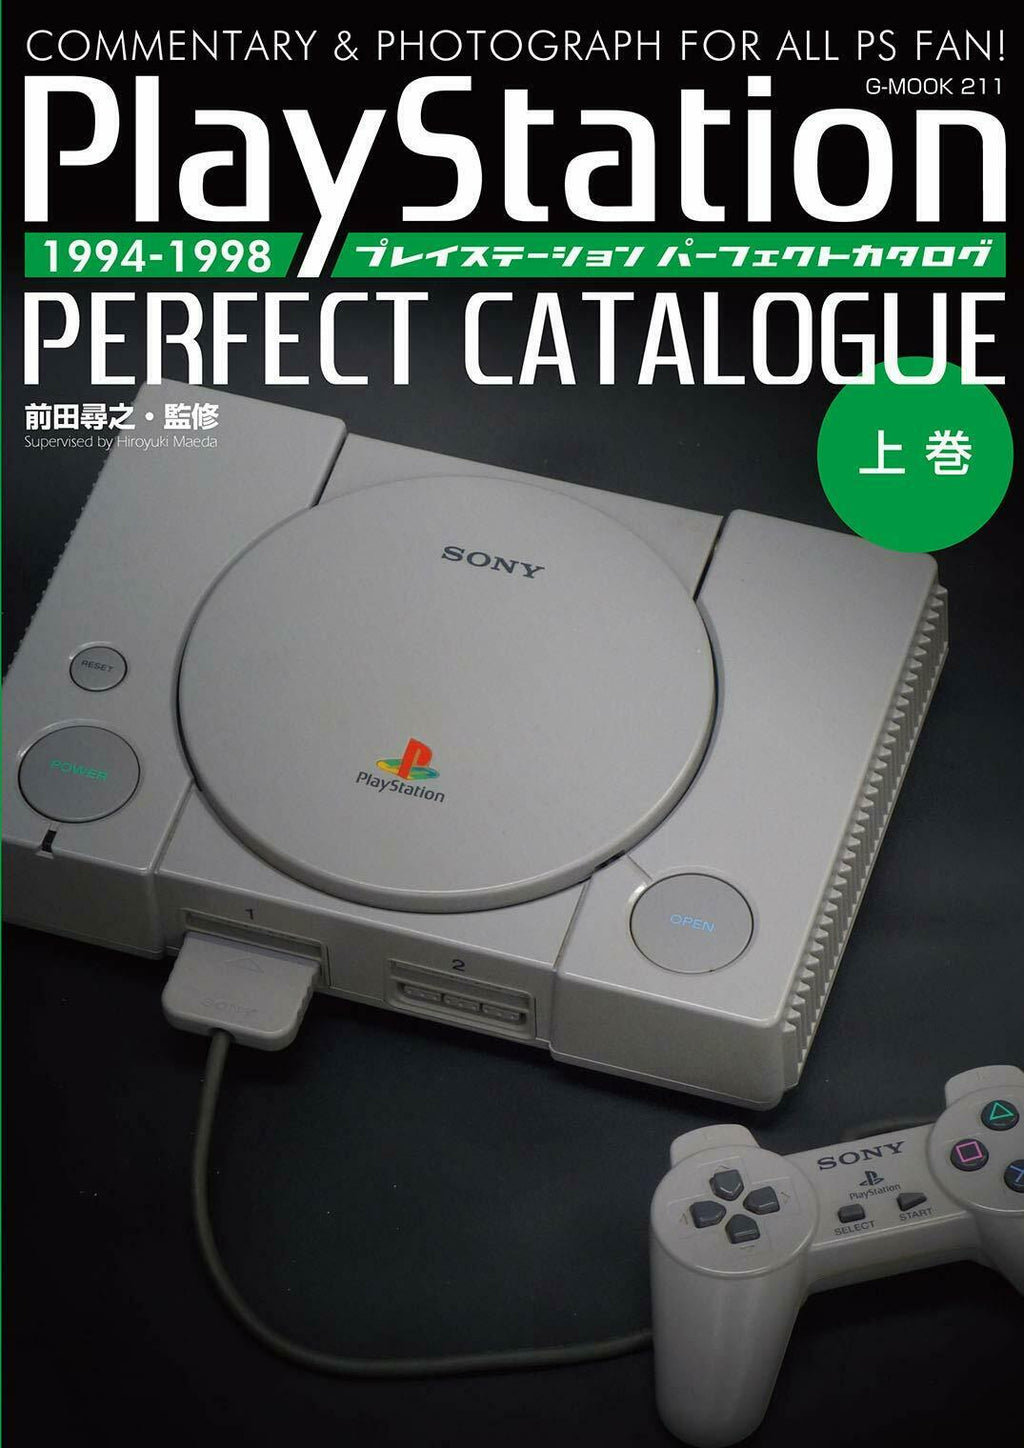 NEW PlayStation Perfect Catalogue Vol.1 1994-1998 | JAPAN Game Guide Book